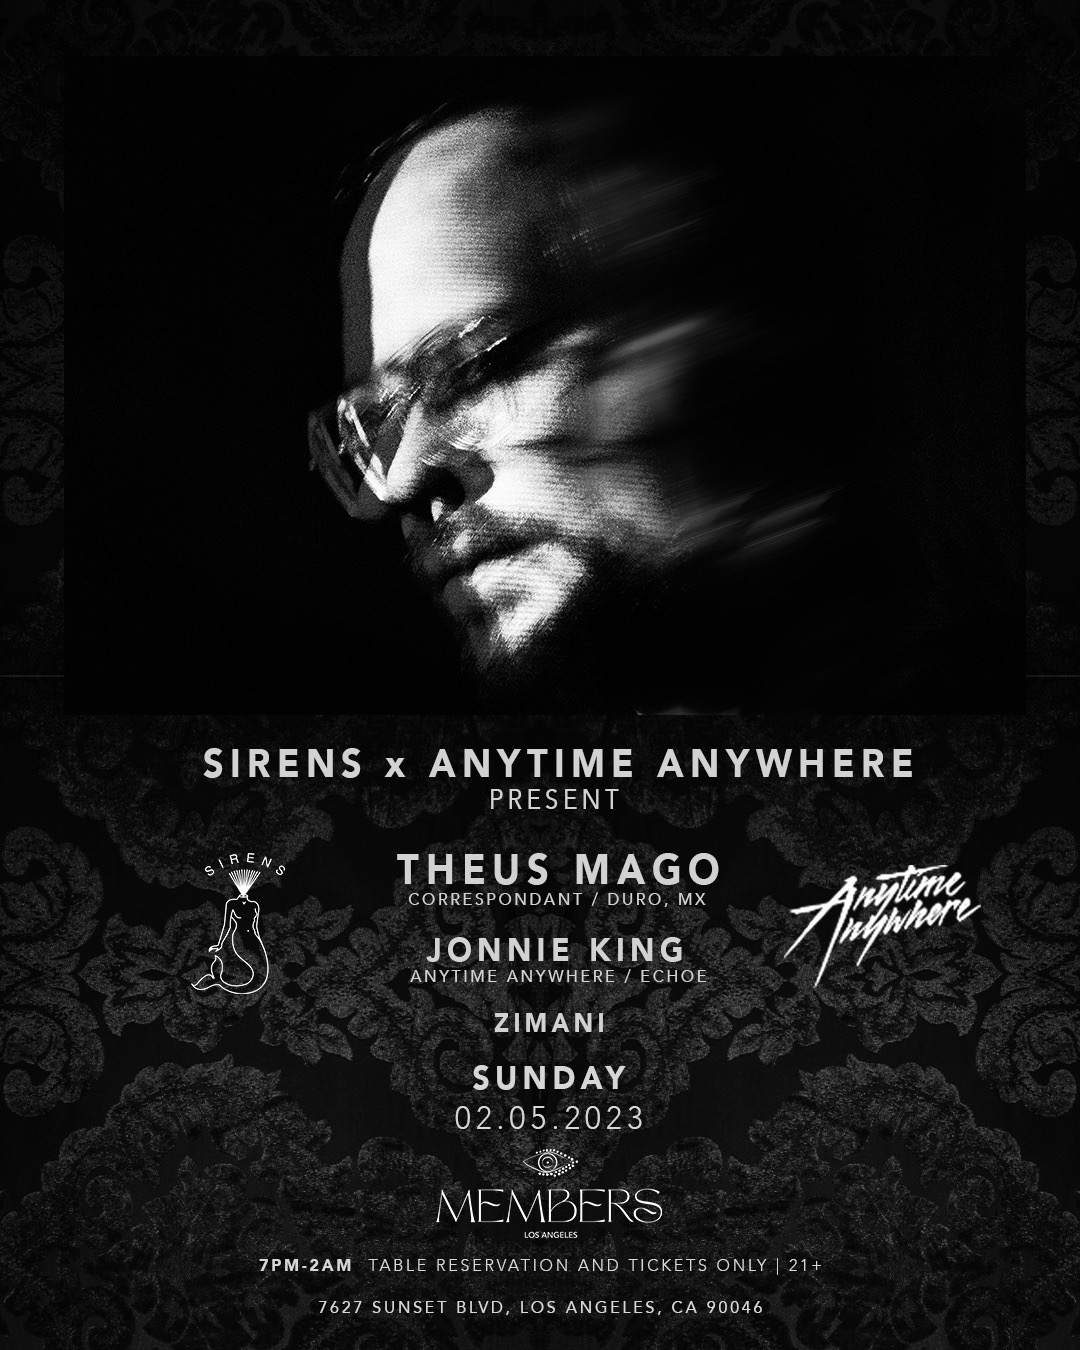 Sirens x Anytime Anywhere present: Theus Mago and Jonnie King - Página trasera